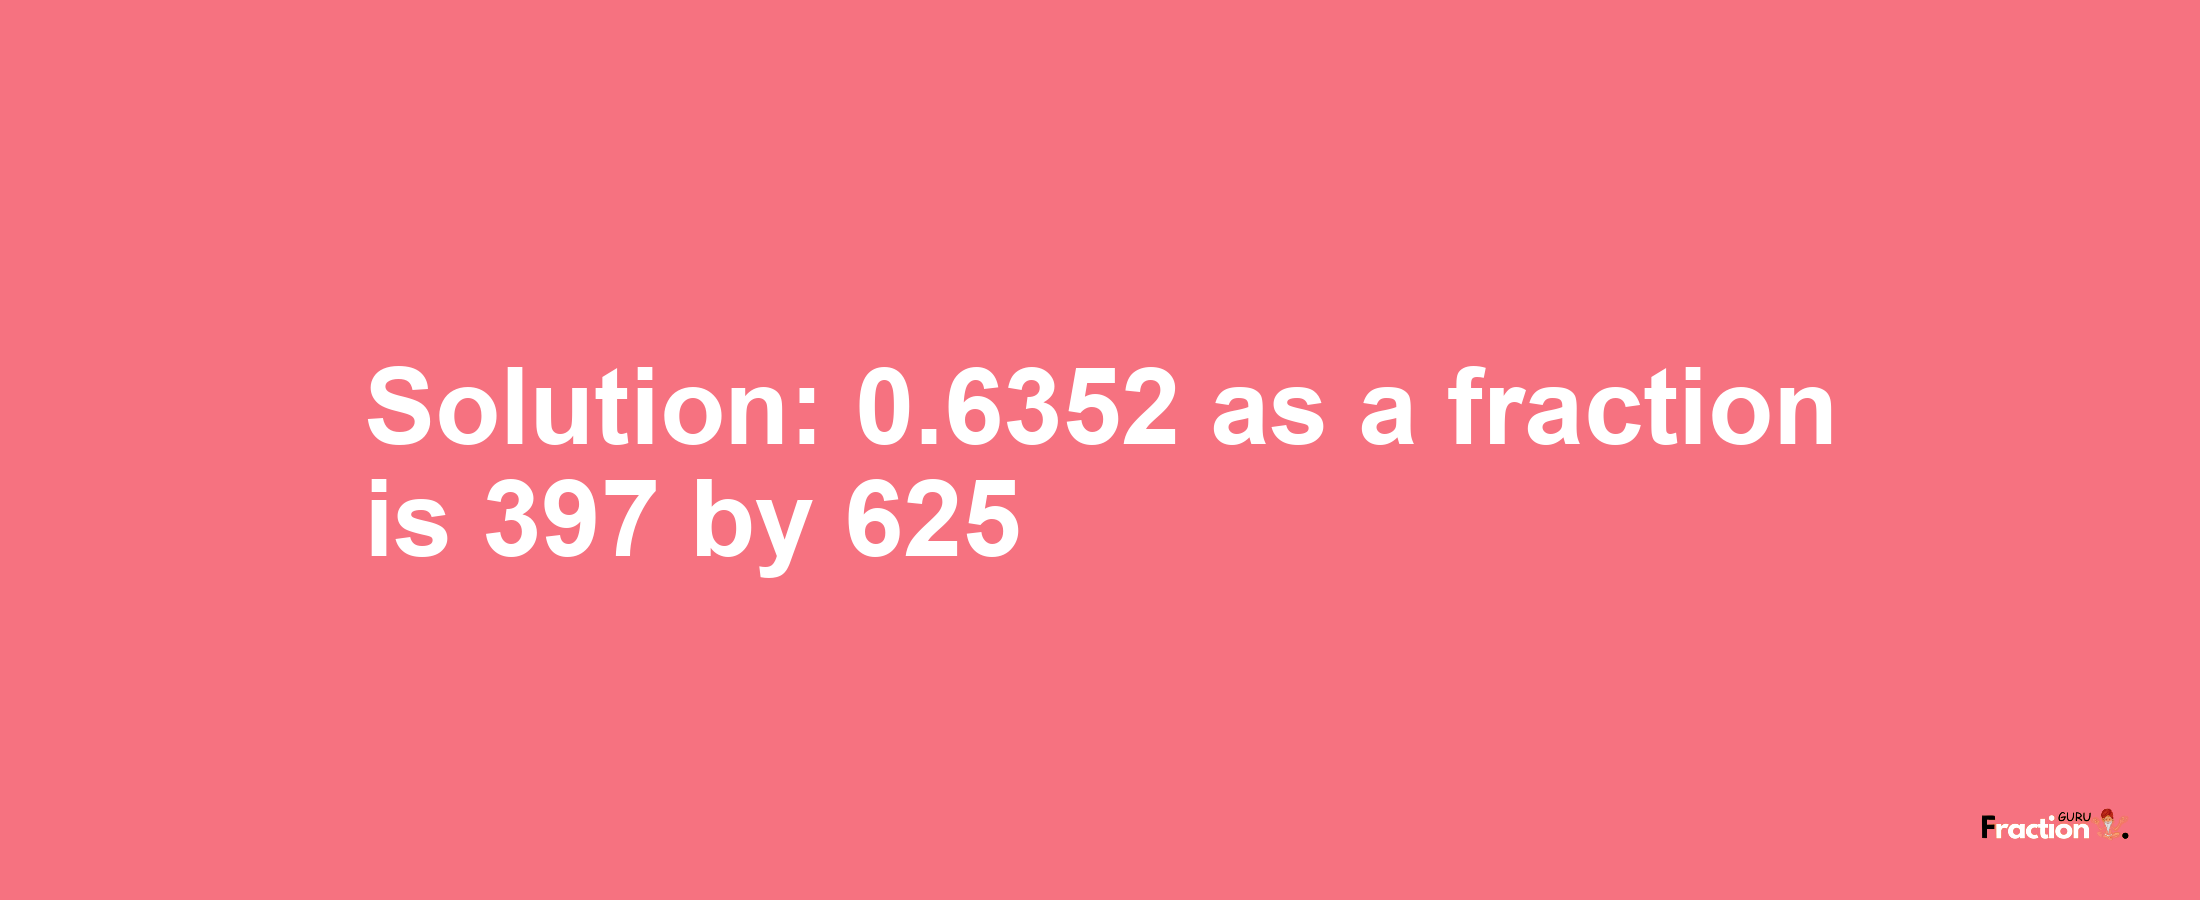 Solution:0.6352 as a fraction is 397/625